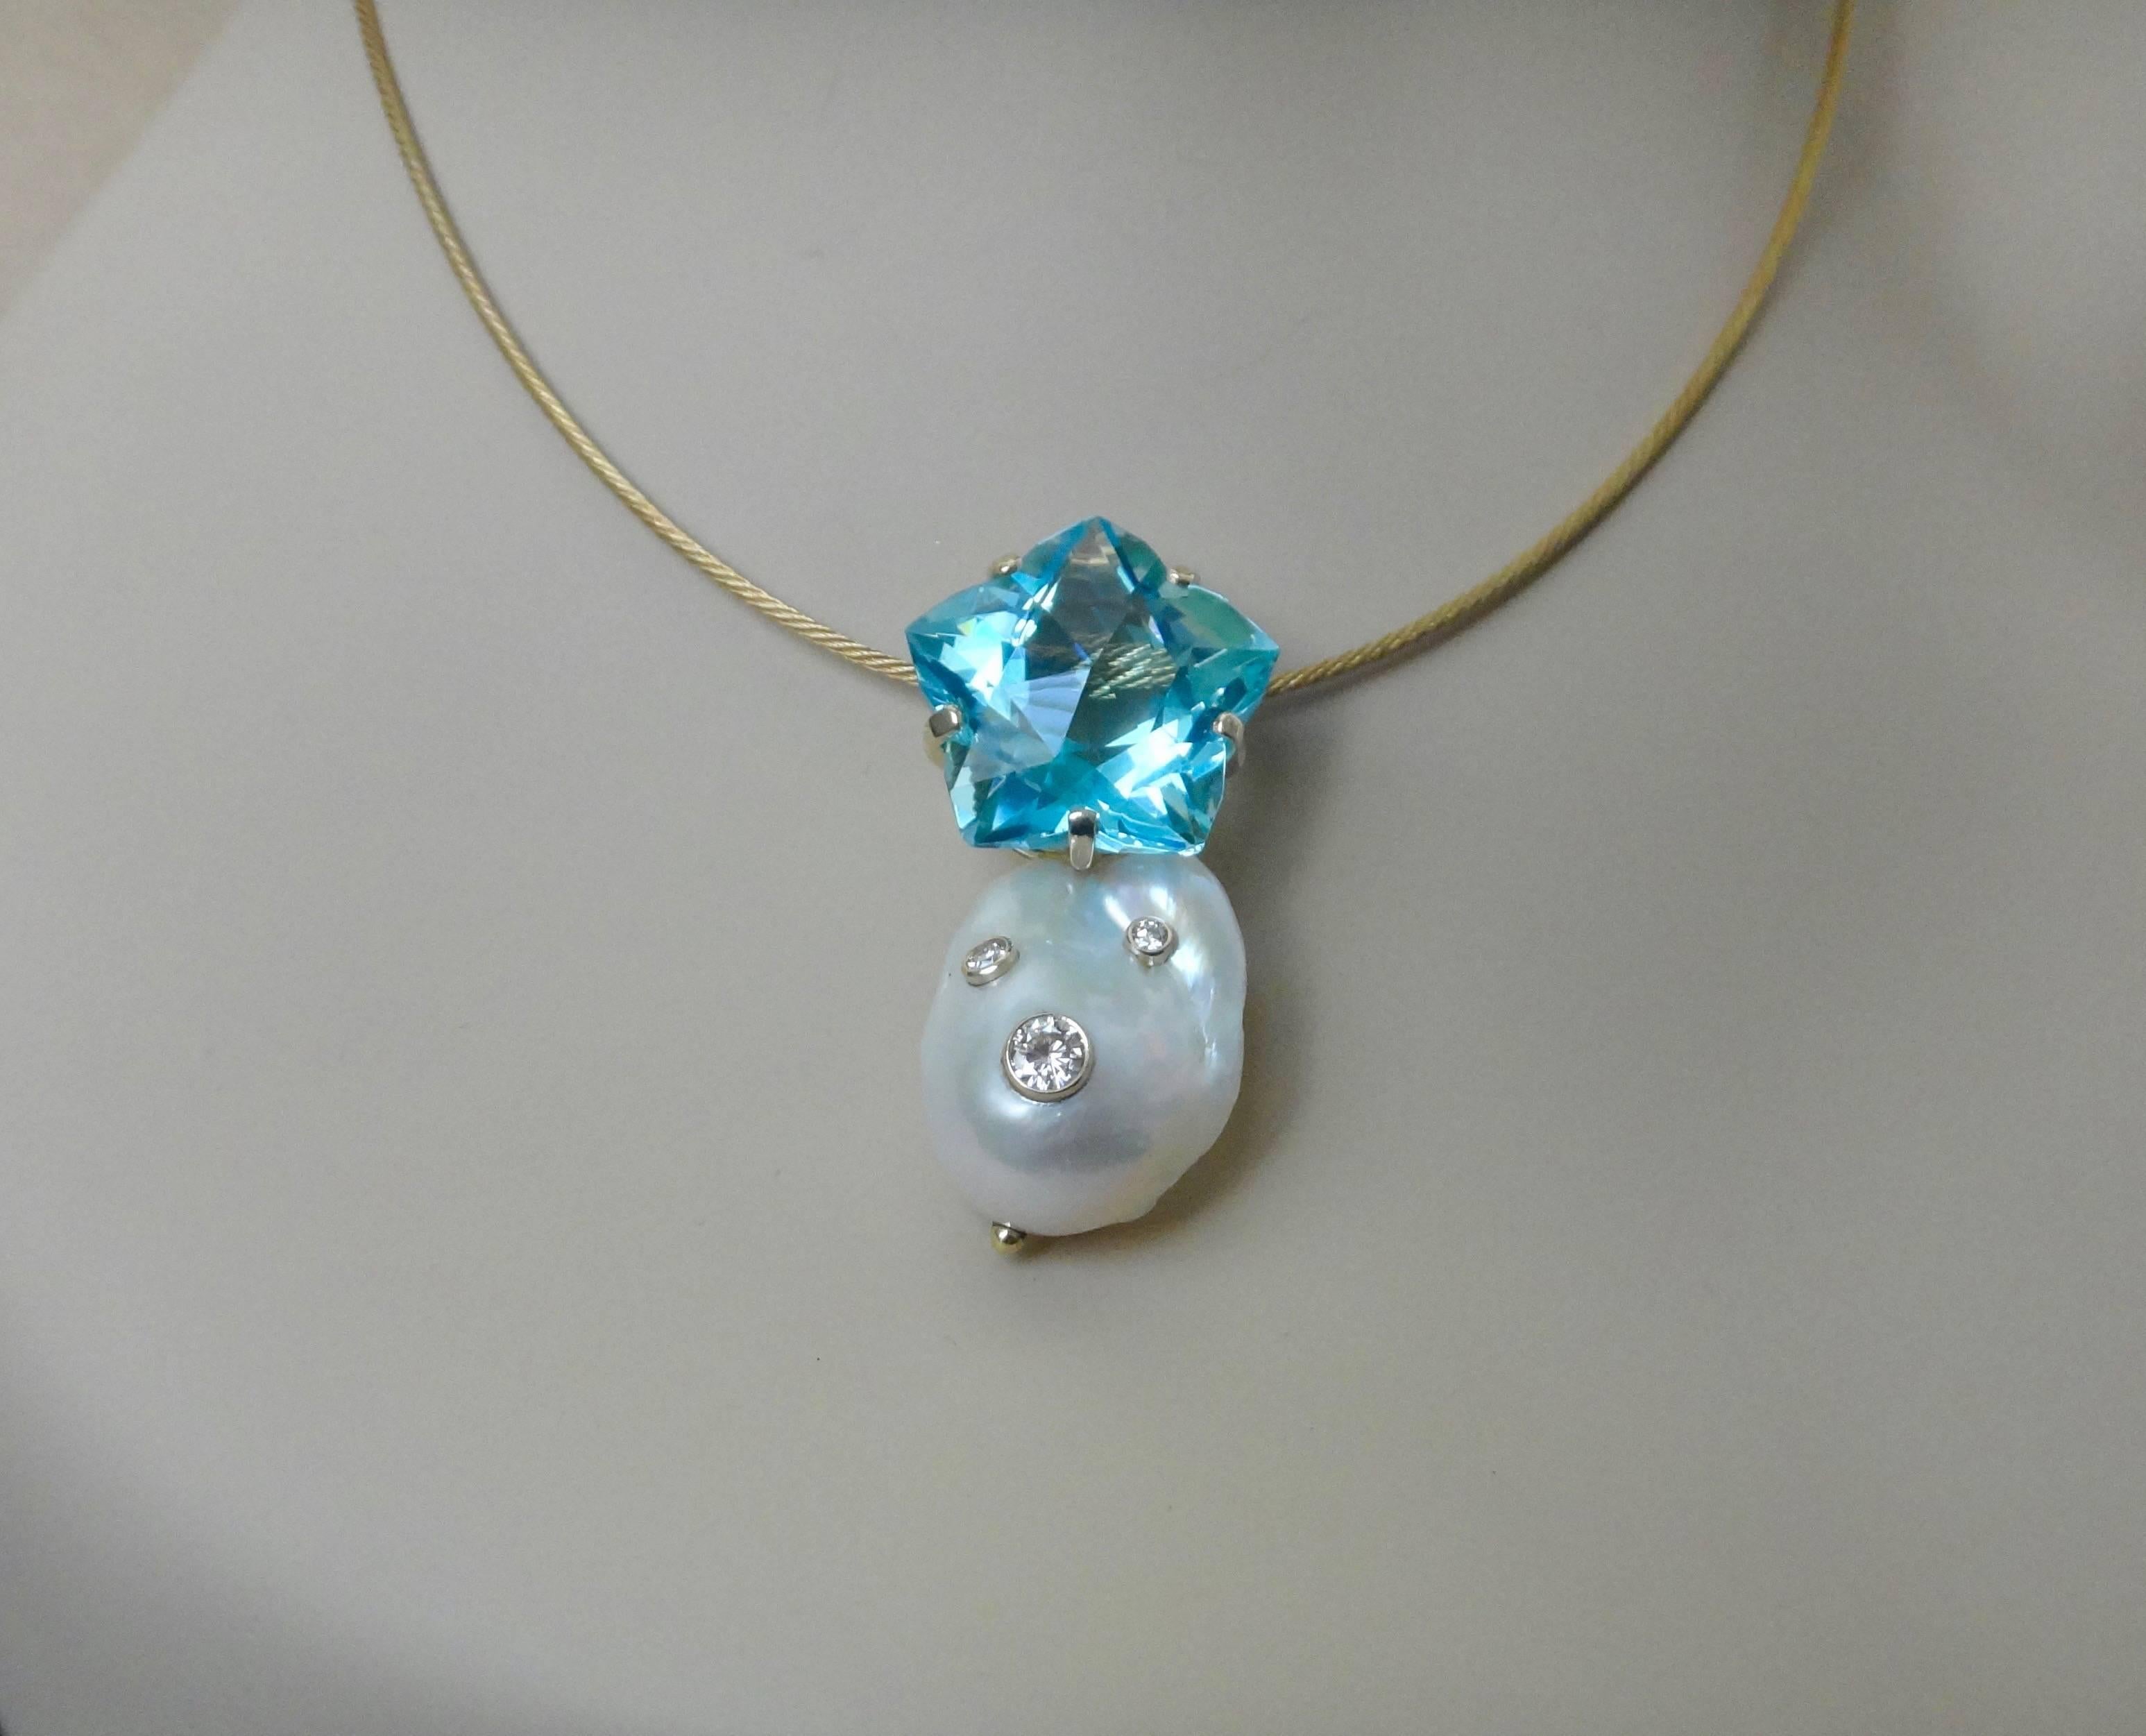 A uniquely cut blue topaz is the star of this pendant.  The bright, aquamarine blue gem is expertly shaped and weighs 19.85 carats.  It is complimented with an exquisite white cloud pearl that has been drilled and decorated with three brilliant cut